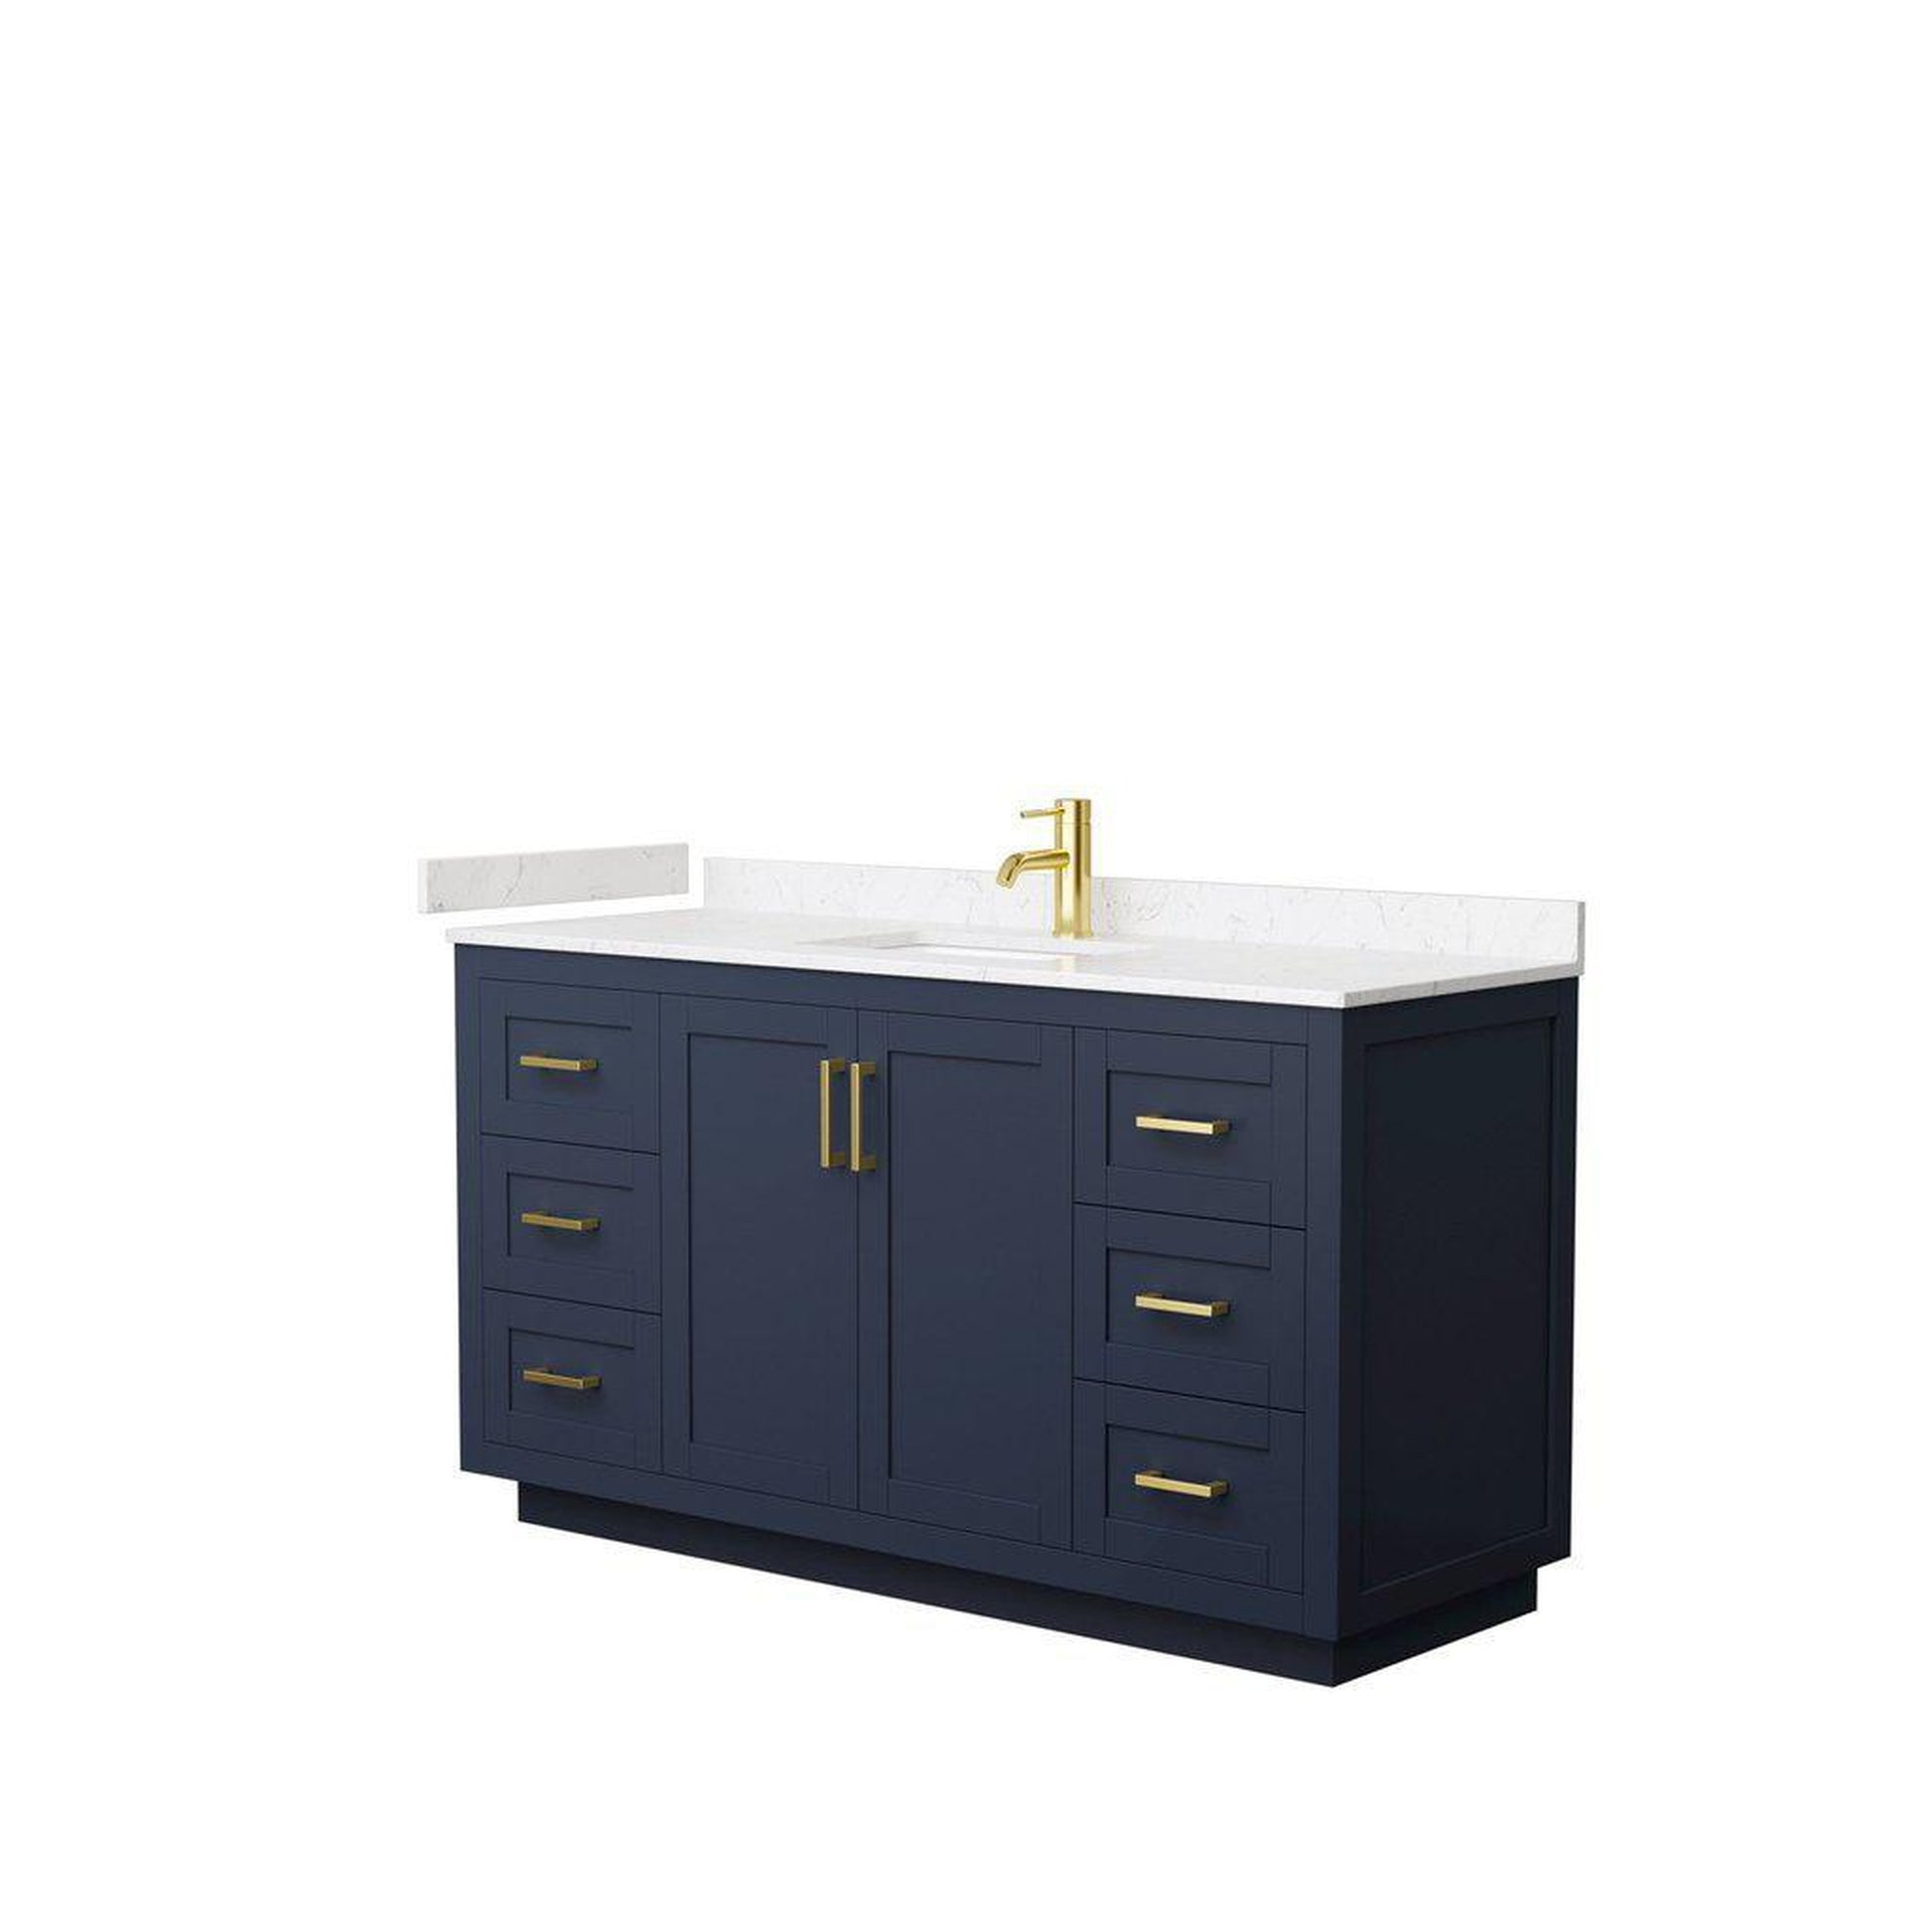 Wyndham Collection Miranda 60" Single Bathroom Dark Blue Vanity Set With Light-Vein Carrara Cultured Marble Countertop, Undermount Square Sink, And Brushed Gold Trim